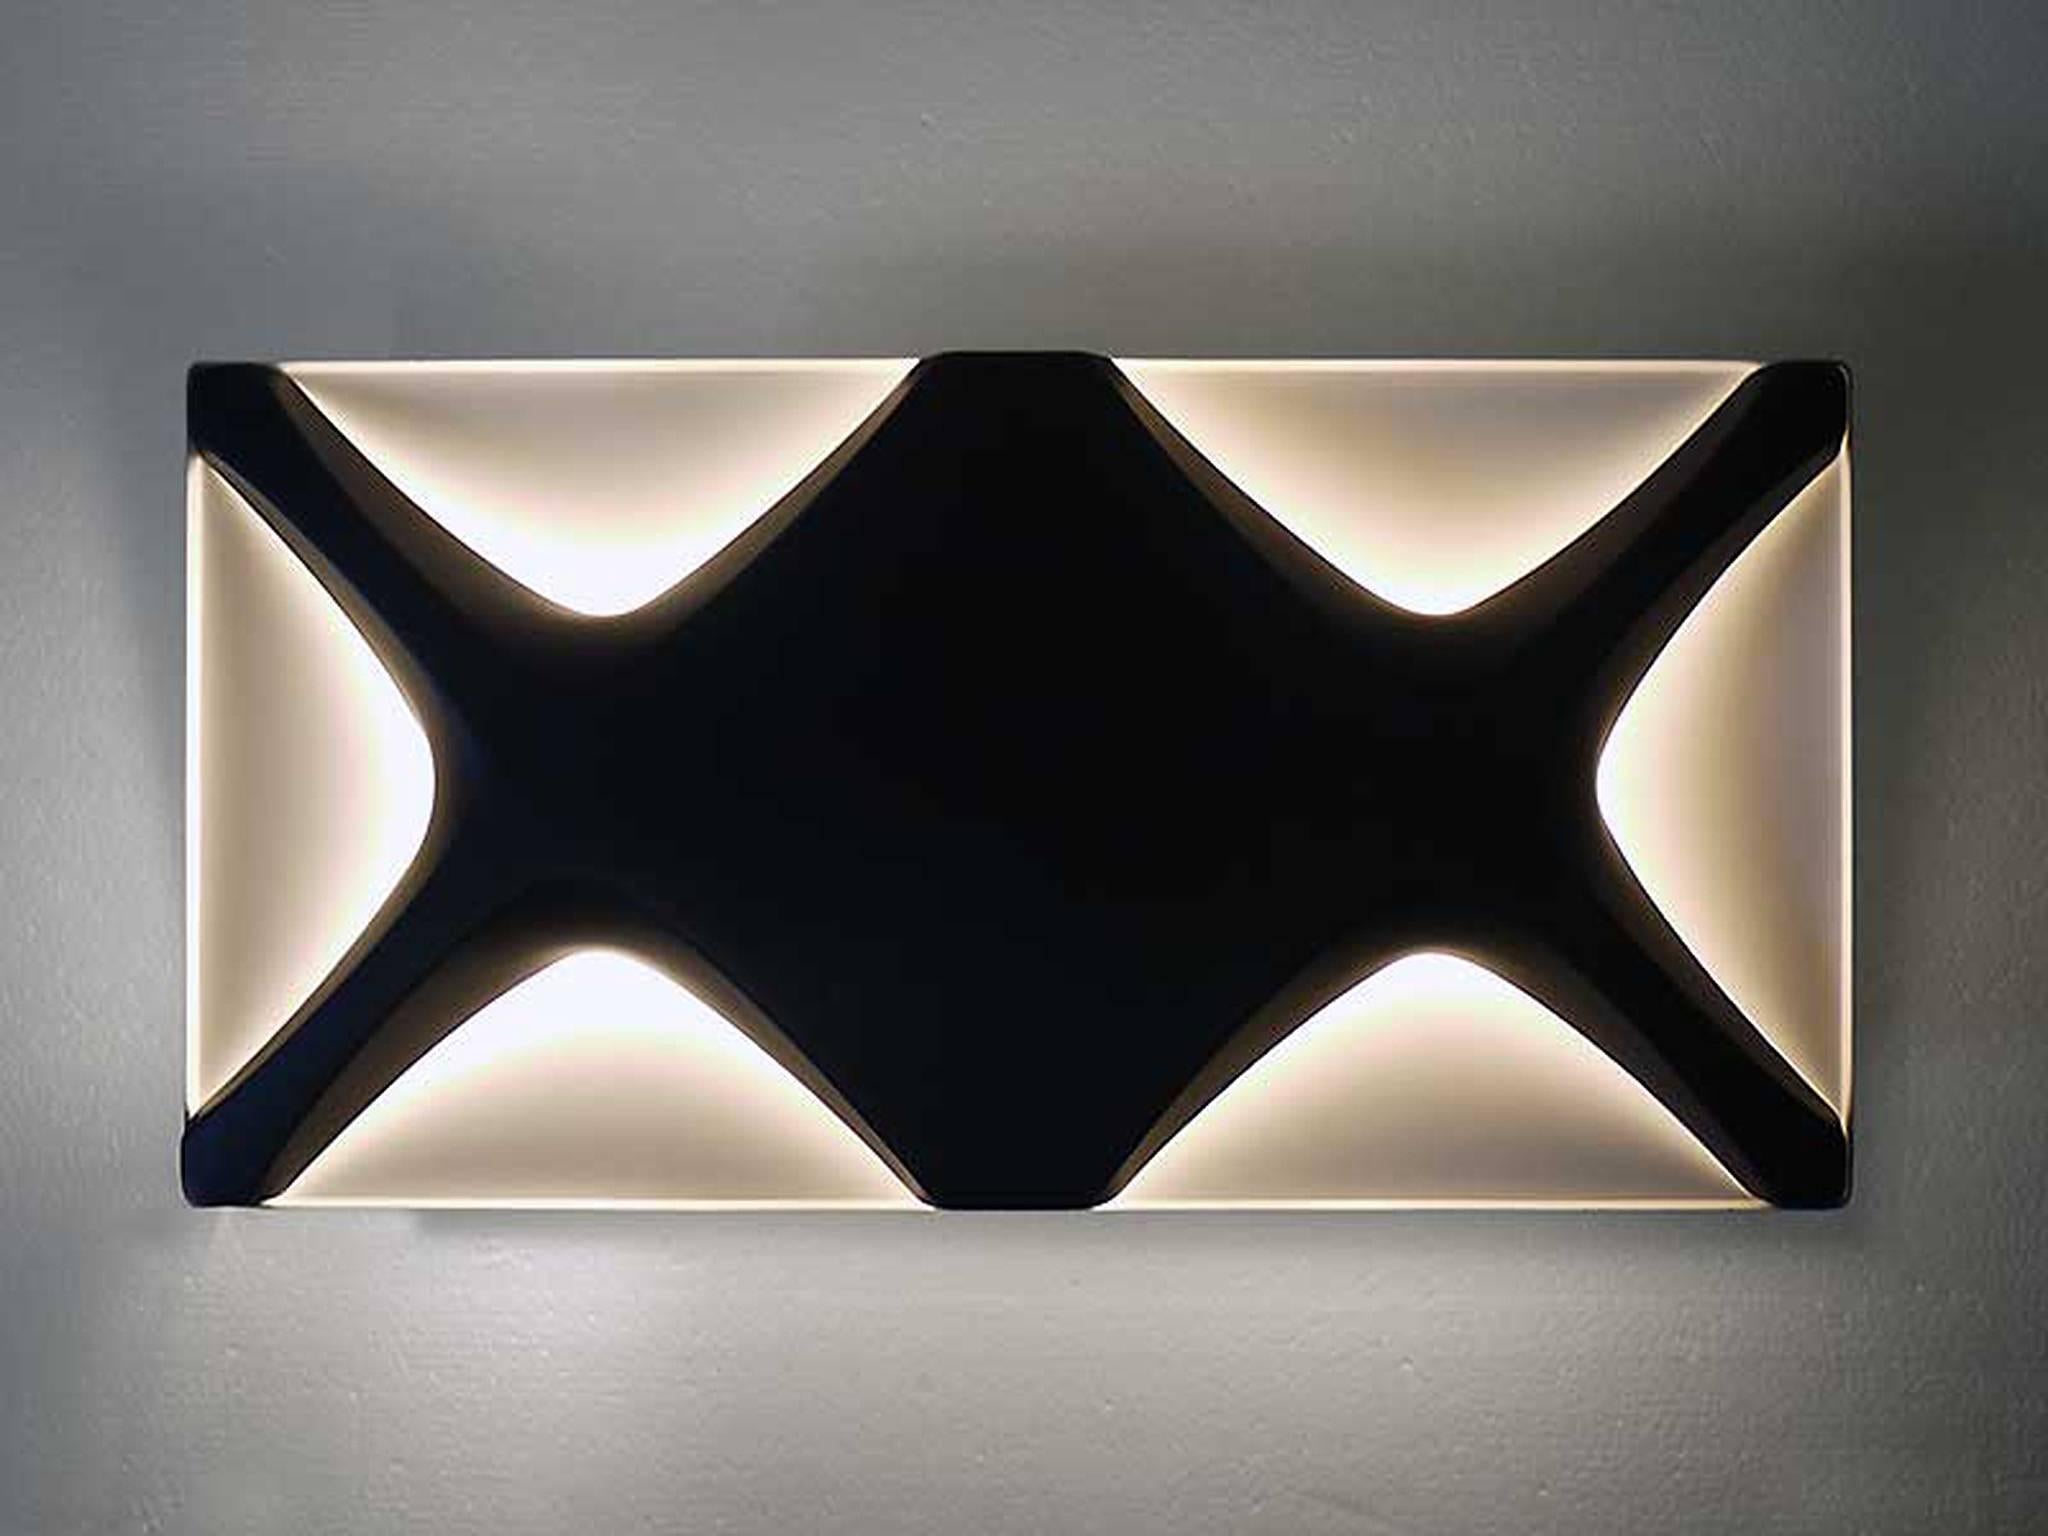 Very rare oyster wall lamp by Dieter Witte and Rolf Krüger for Staff, Germany, 1968. Black and white enameled metal. 

Lighting: takes two large Edison E14 base screw bulbs. 
Wattage: we recommend up to 60w per bulb. Works on 220v as well as 110v.